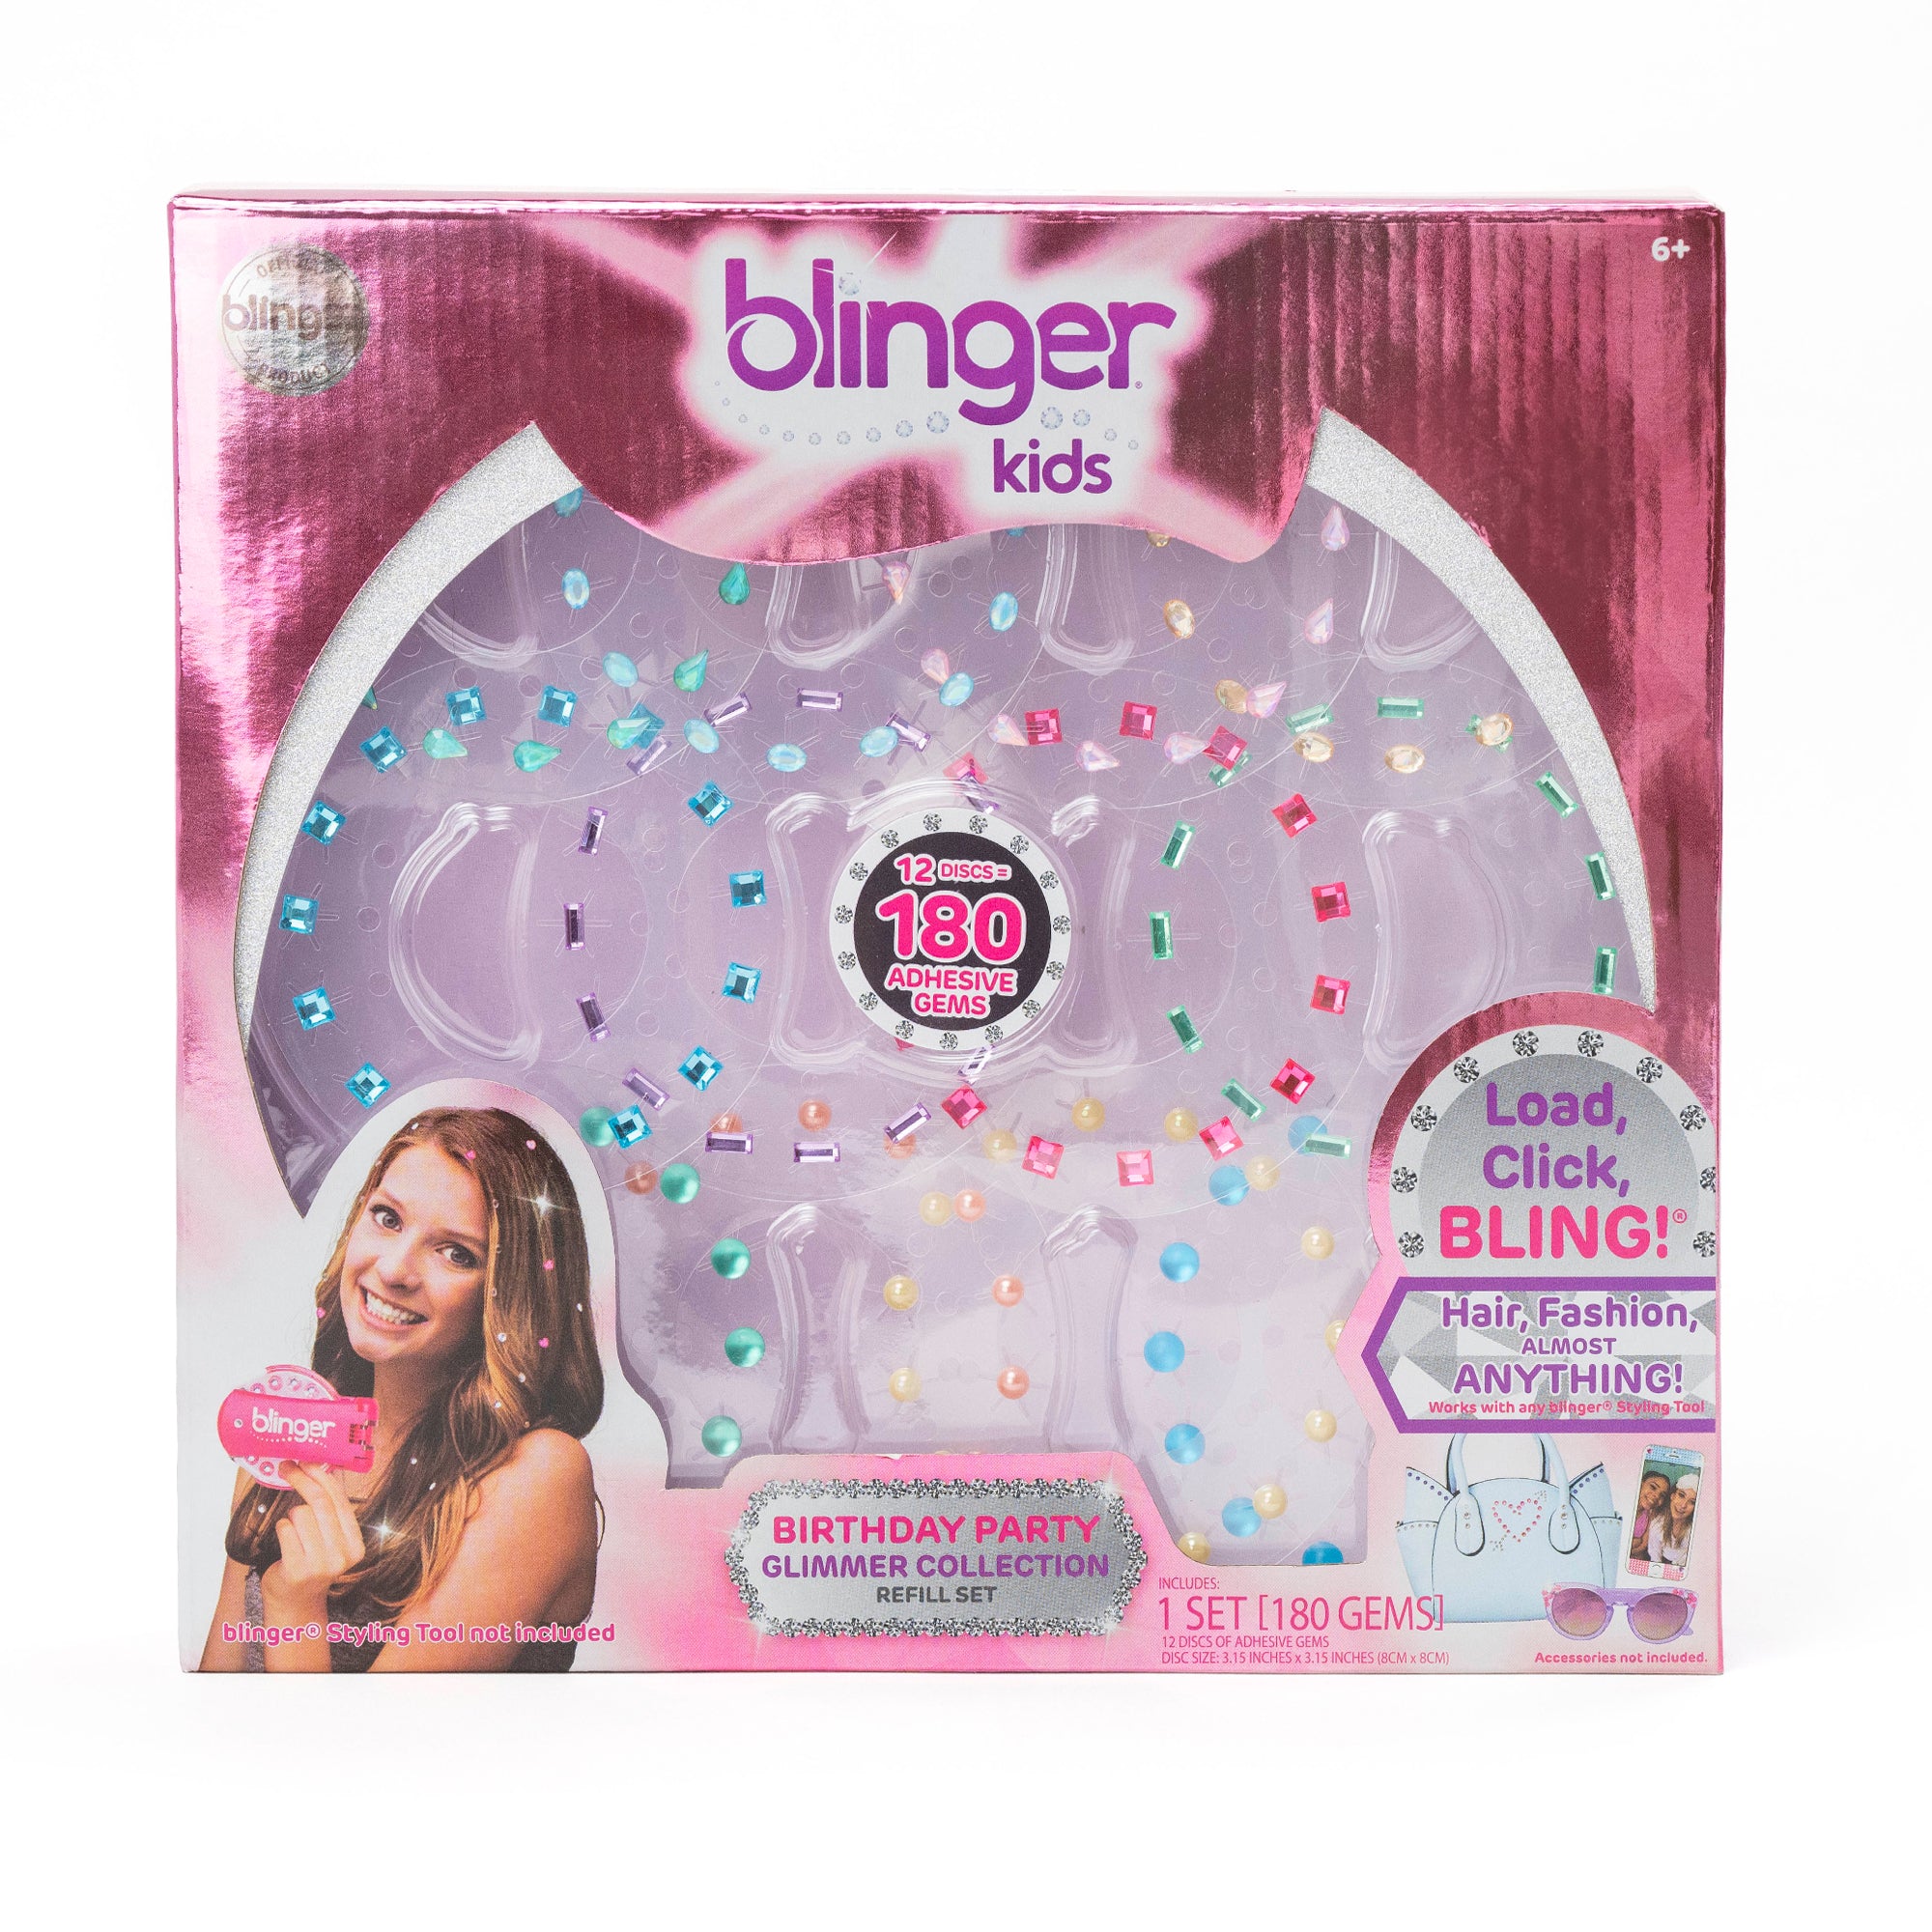 blinger® Glimmer Collection Refill Set with 180 Colorful Acrylic Gems